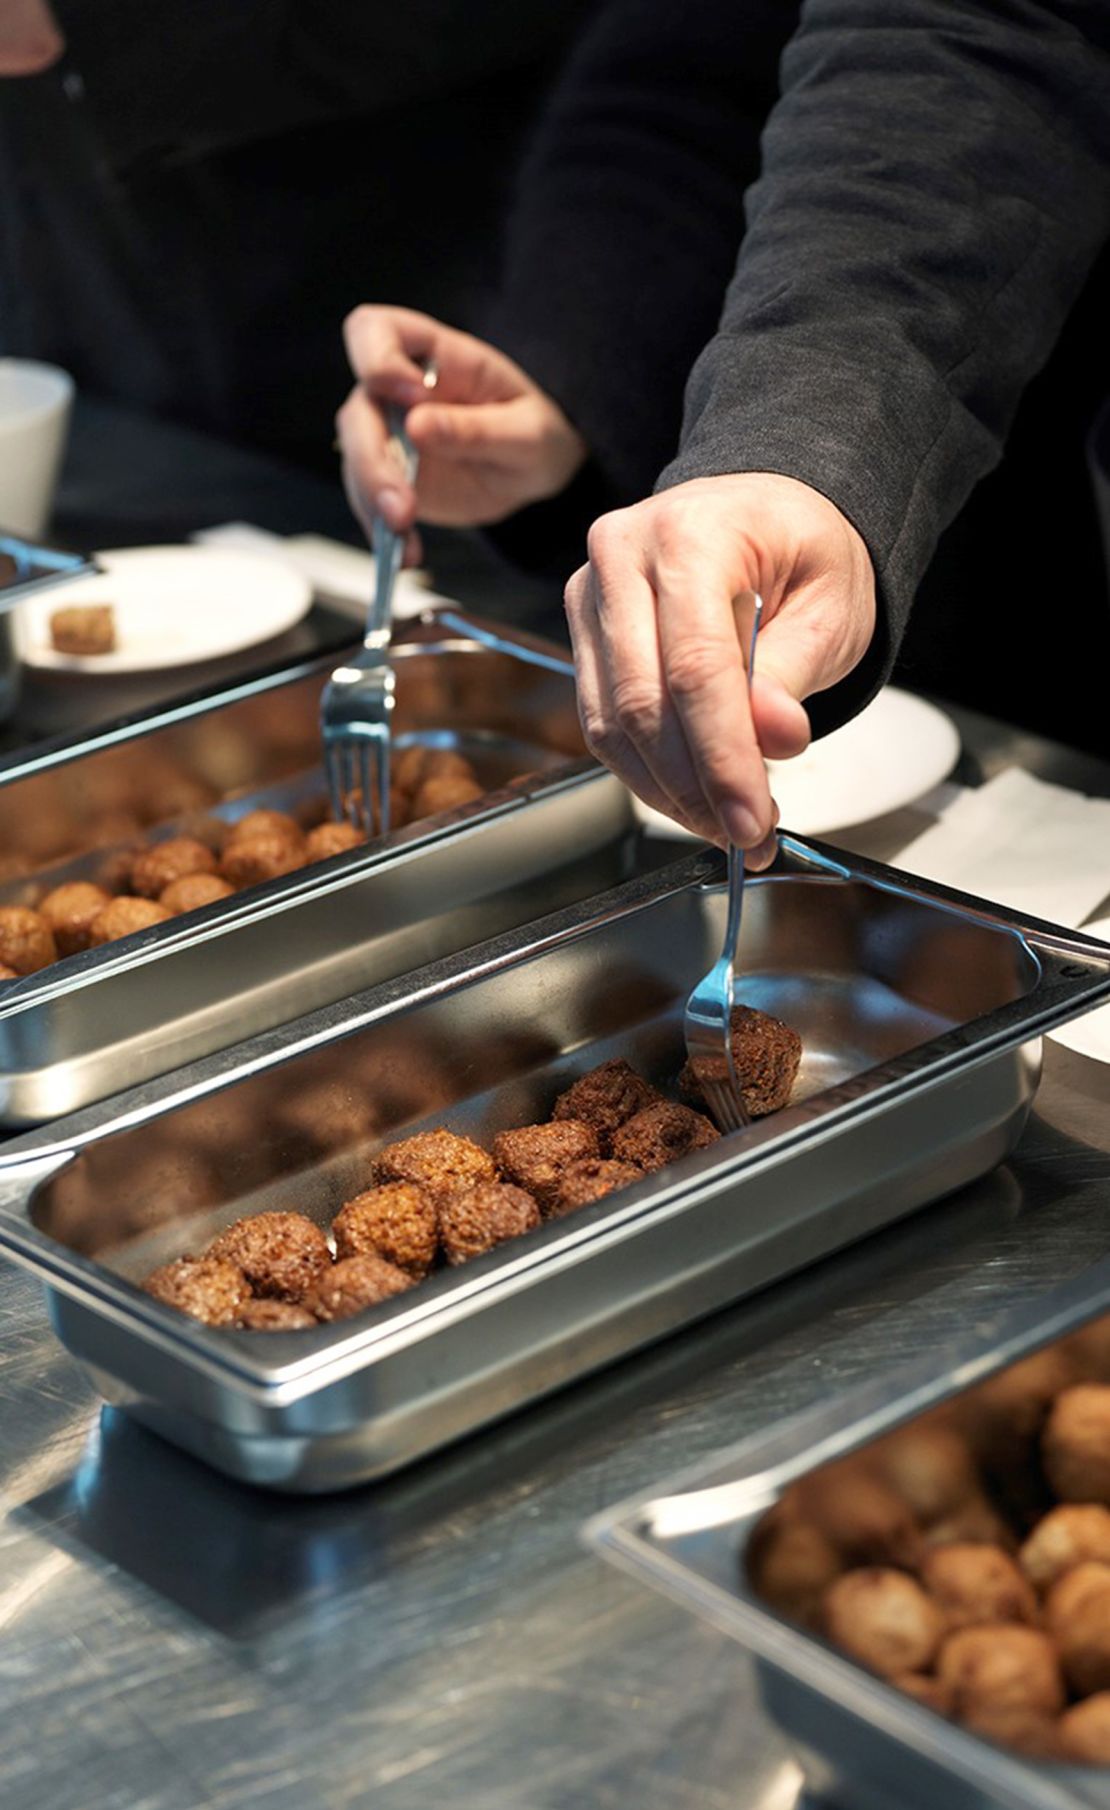 Ikea plans to start testing out a new meatless meatball next year.